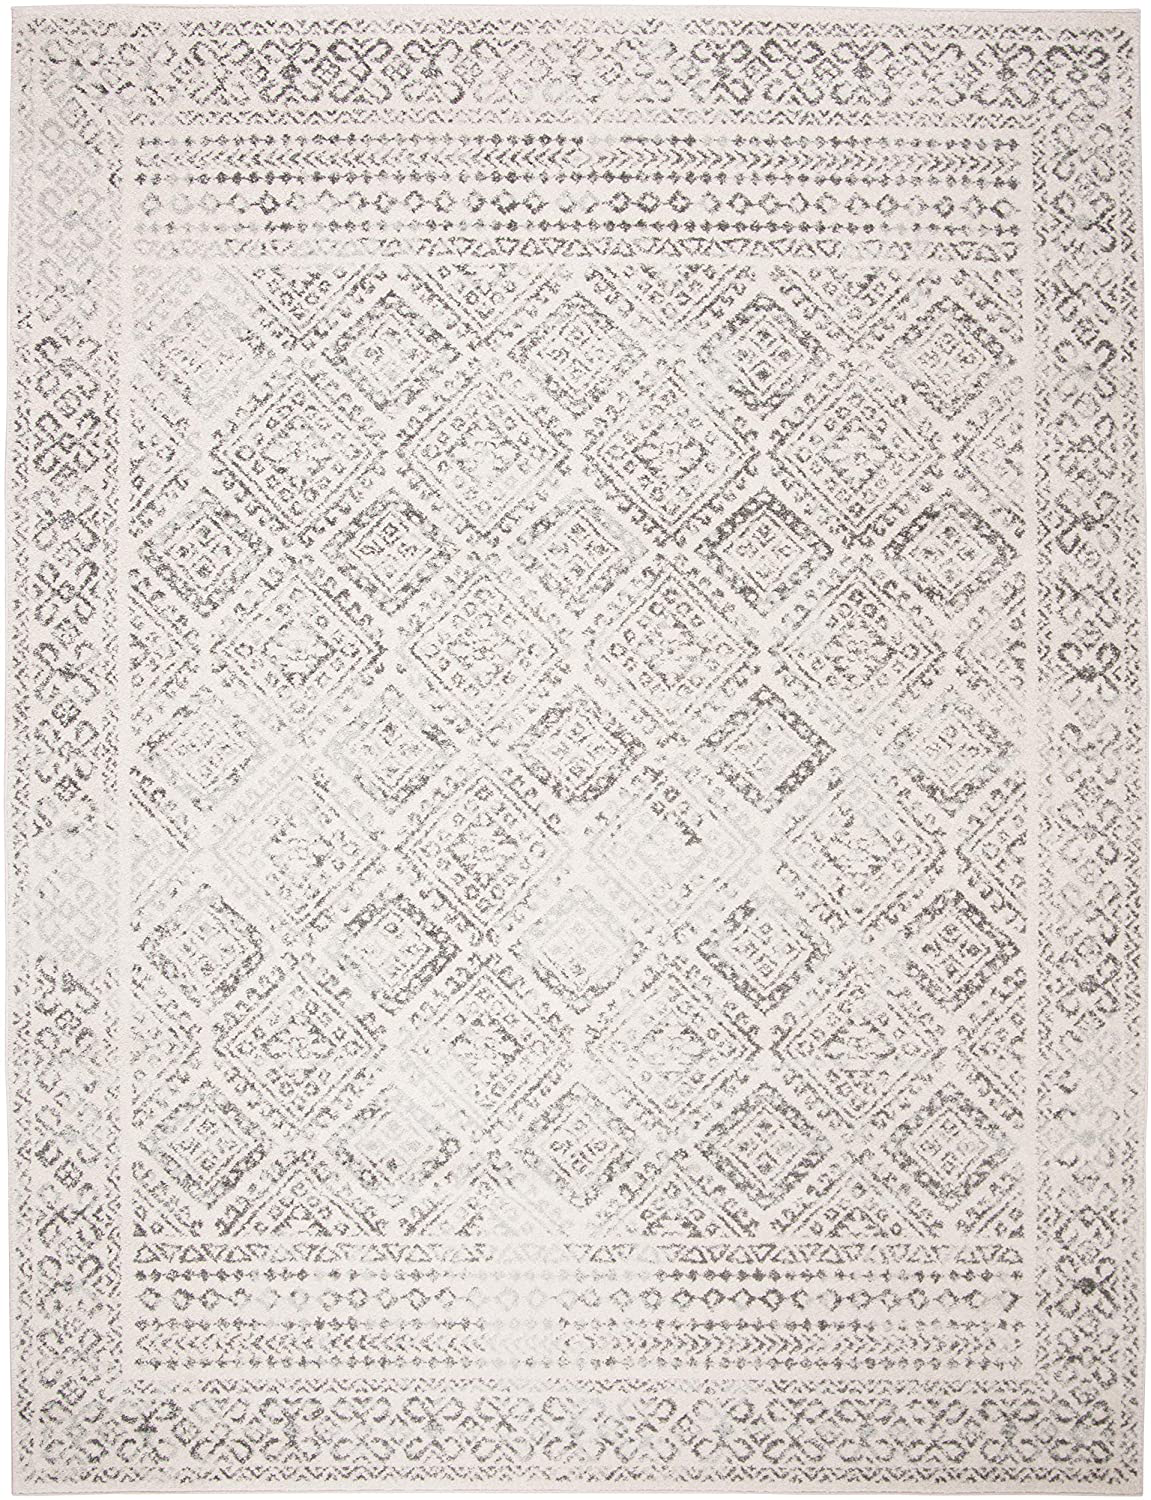 Safavieh Tulum Collection TUL264B Moroccan Boho Distressed Non-Shedding Stain Resistant Living Room Bedroom Area Rug, 3' x 3' Square, Ivory / Turquoise